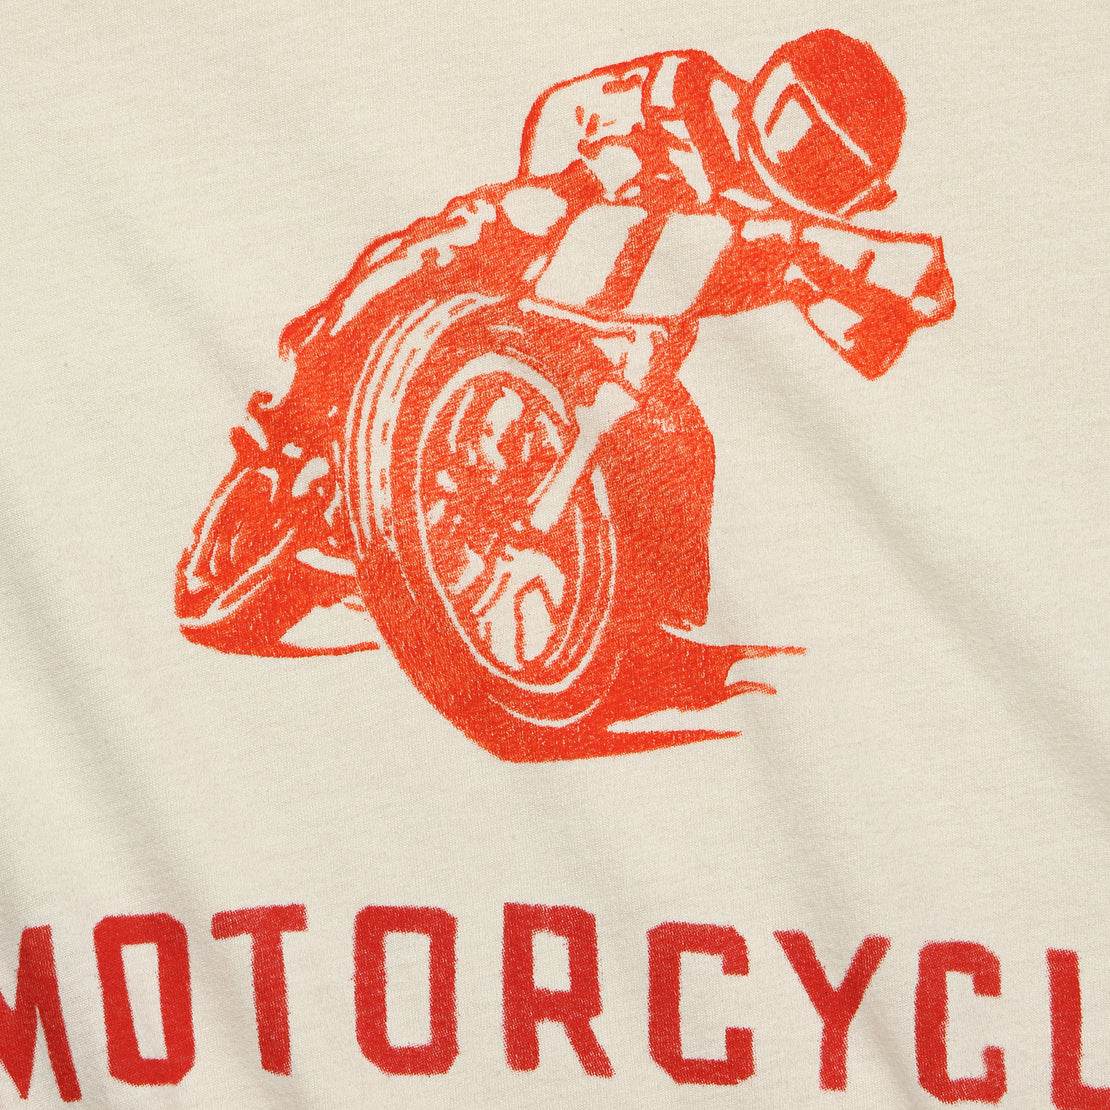 Motorcycle Club Tee - White - Imogene + Willie - STAG Provisions - Tops - S/S Tee - Graphic